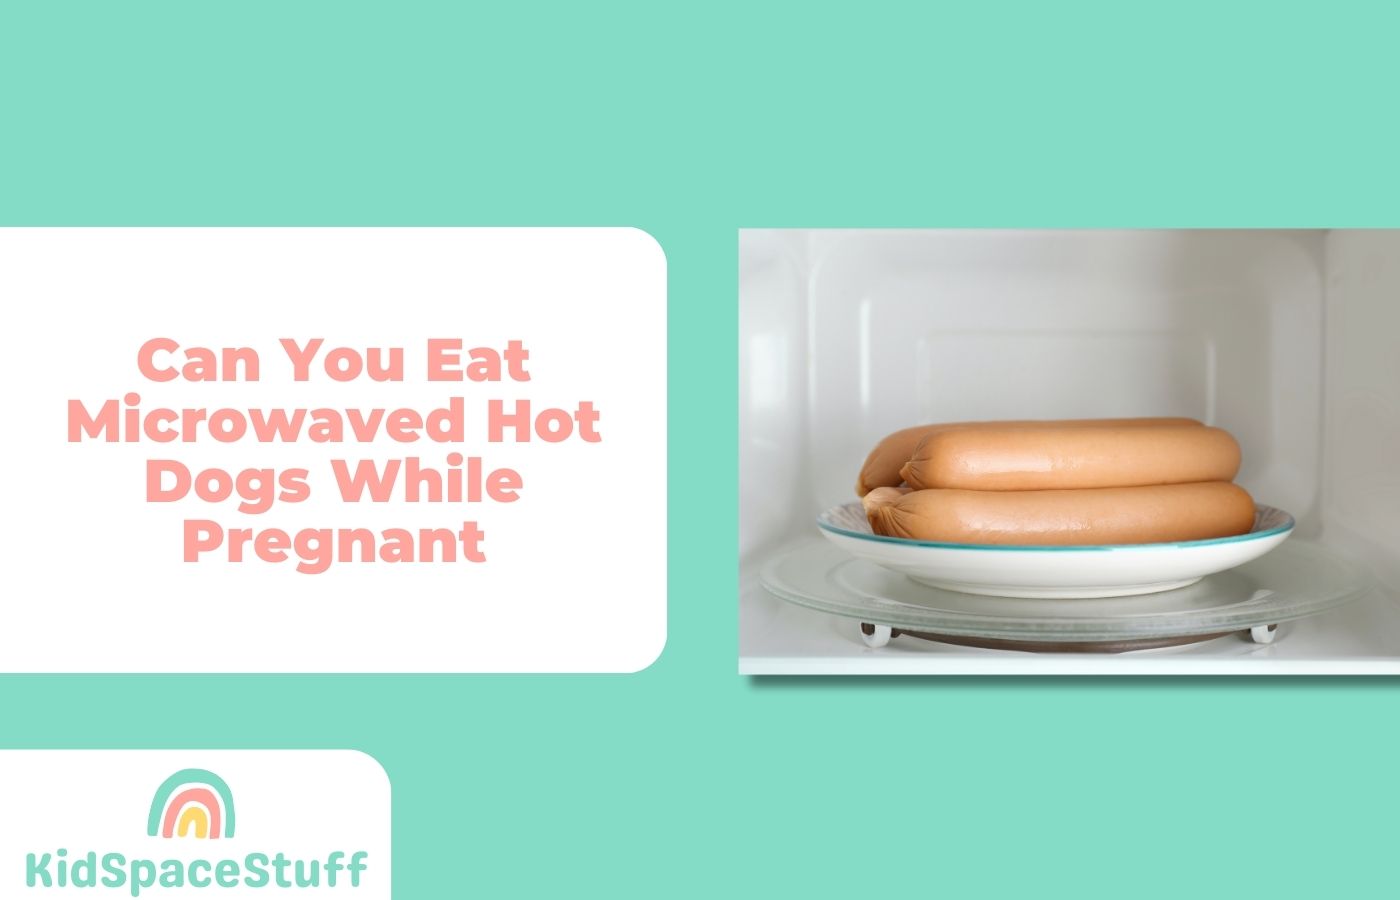 Can You Eat Microwaved Hot Dogs While Pregnant?